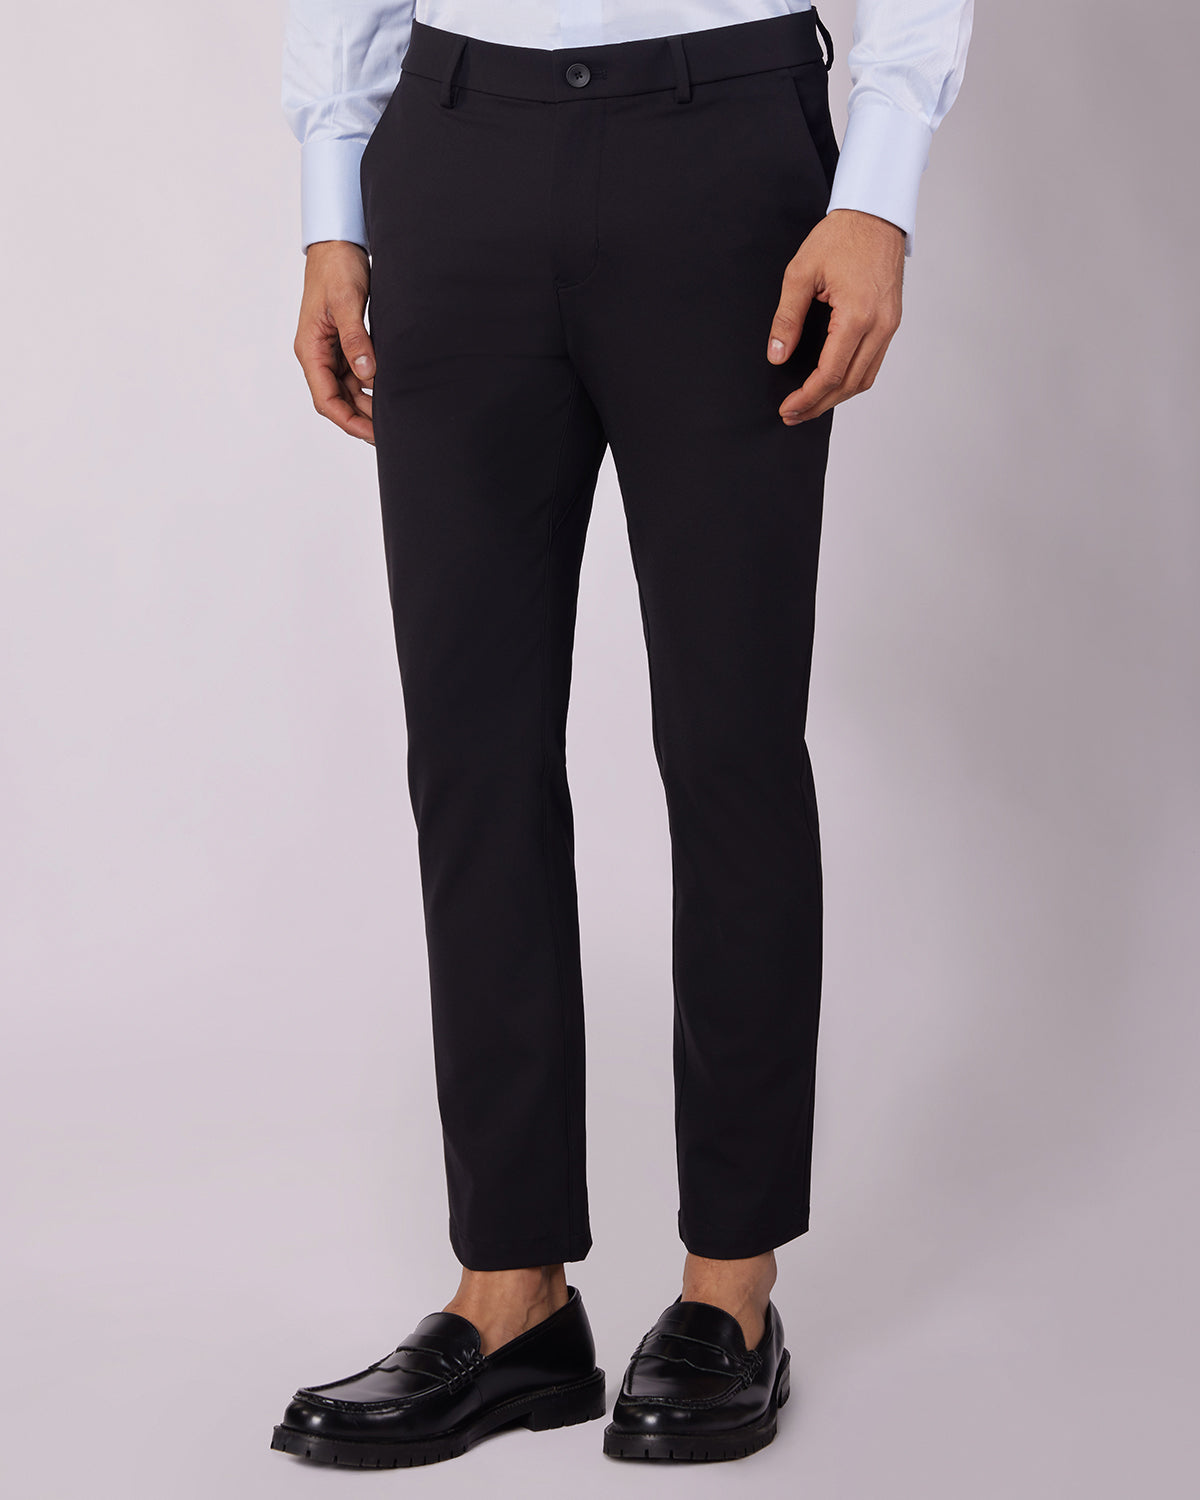 10 Best Shirt Pant combinations for Office Formals for Men